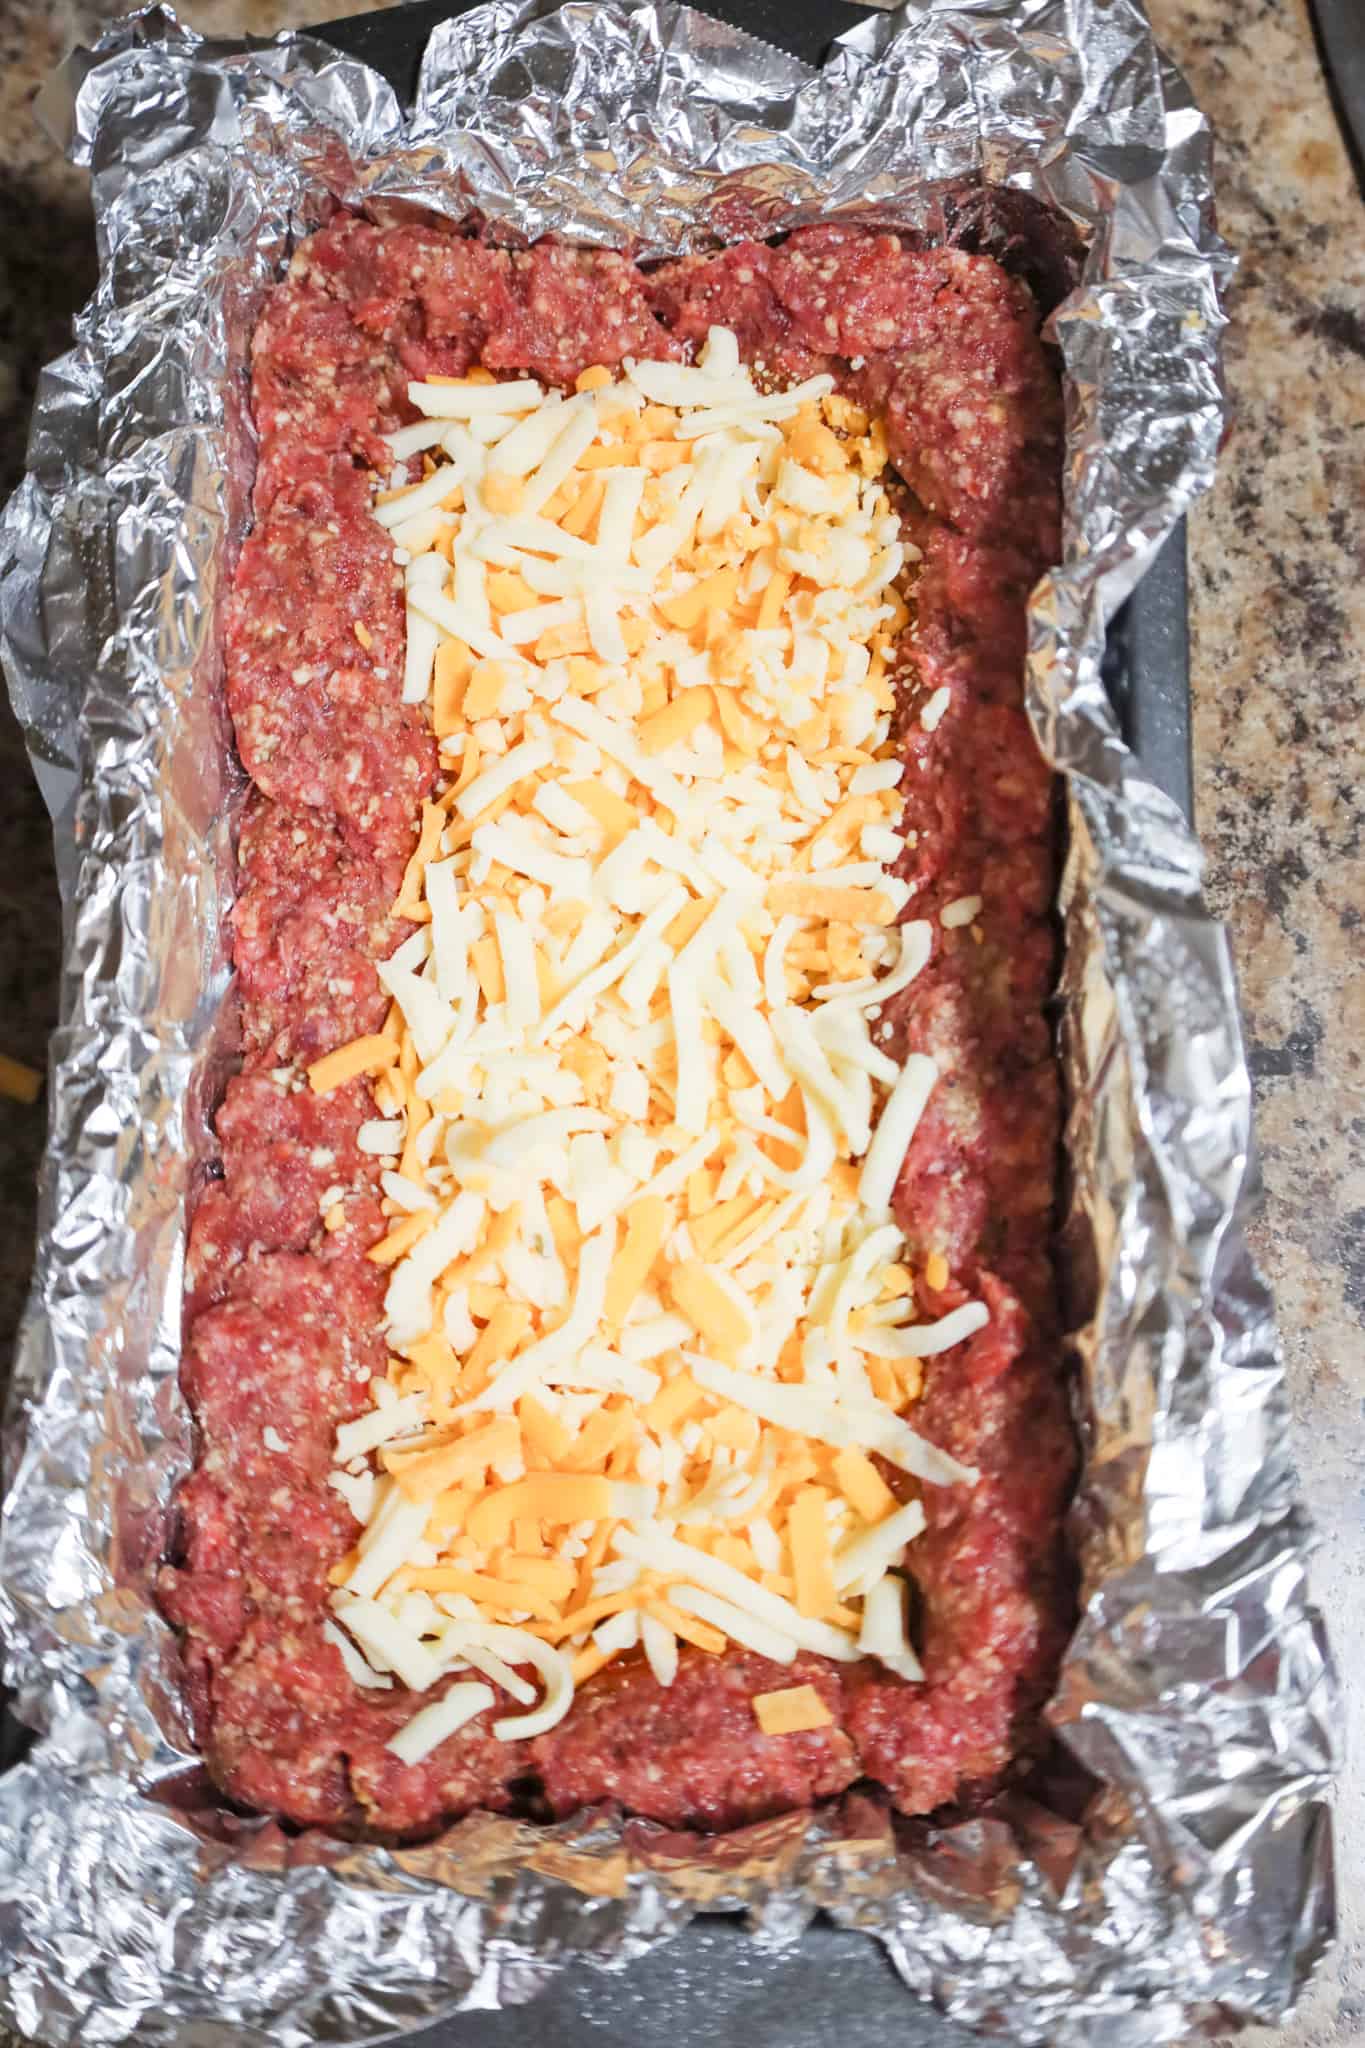 shredded cheese in the center of meatloaf mixture in a loaf pan